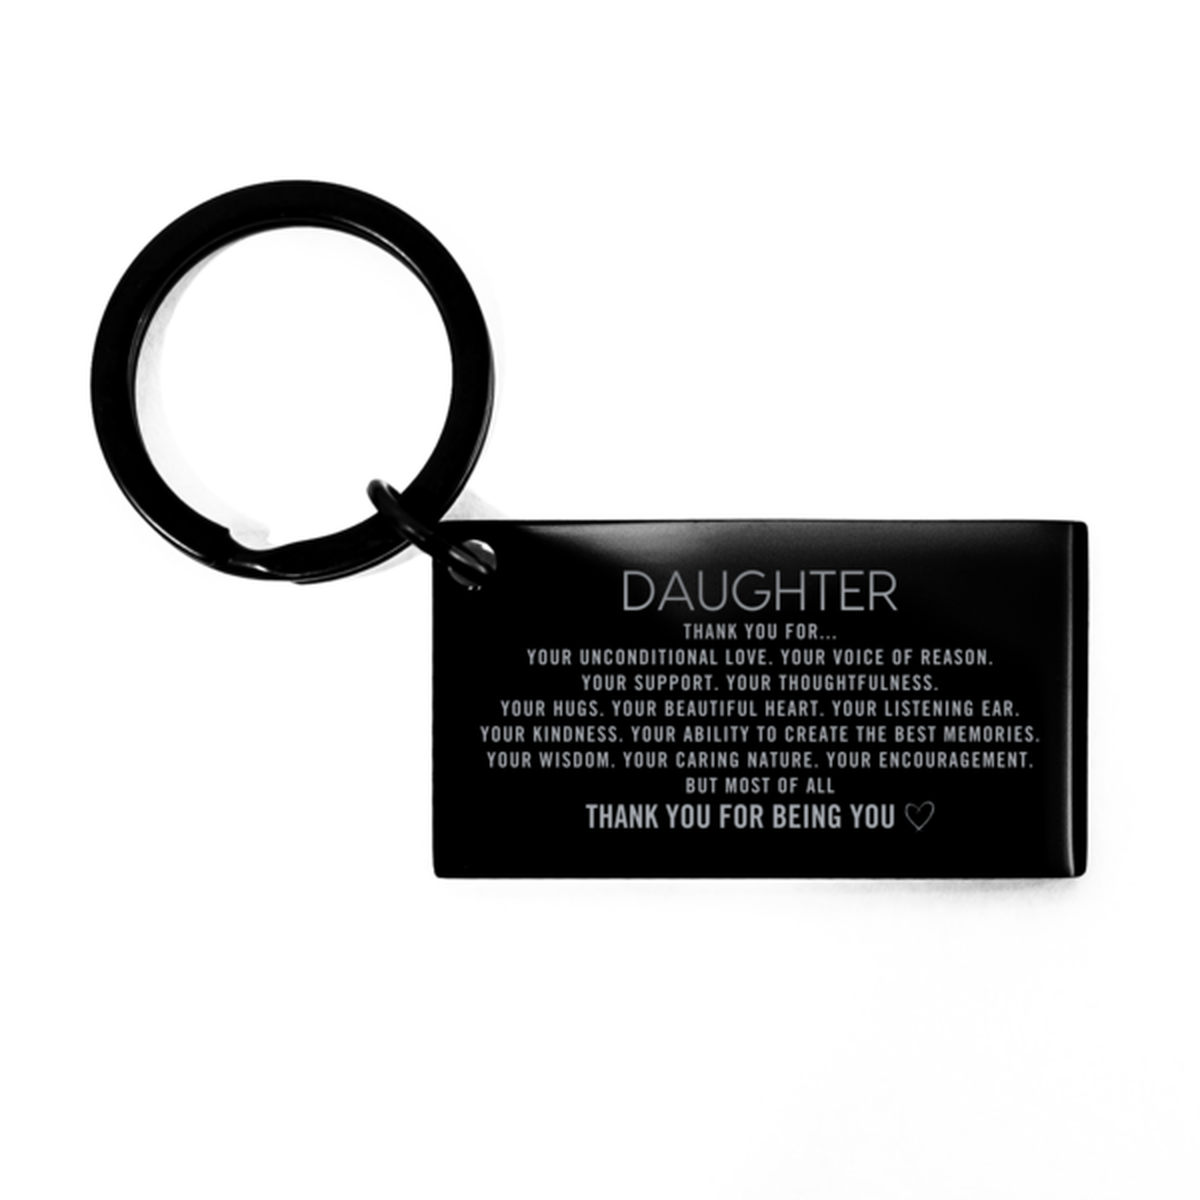 Daughter Keychain Custom, Engraved Gifts For Daughter Christmas Graduation Birthday Gifts for Men Women Daughter Thank you for Your unconditional love